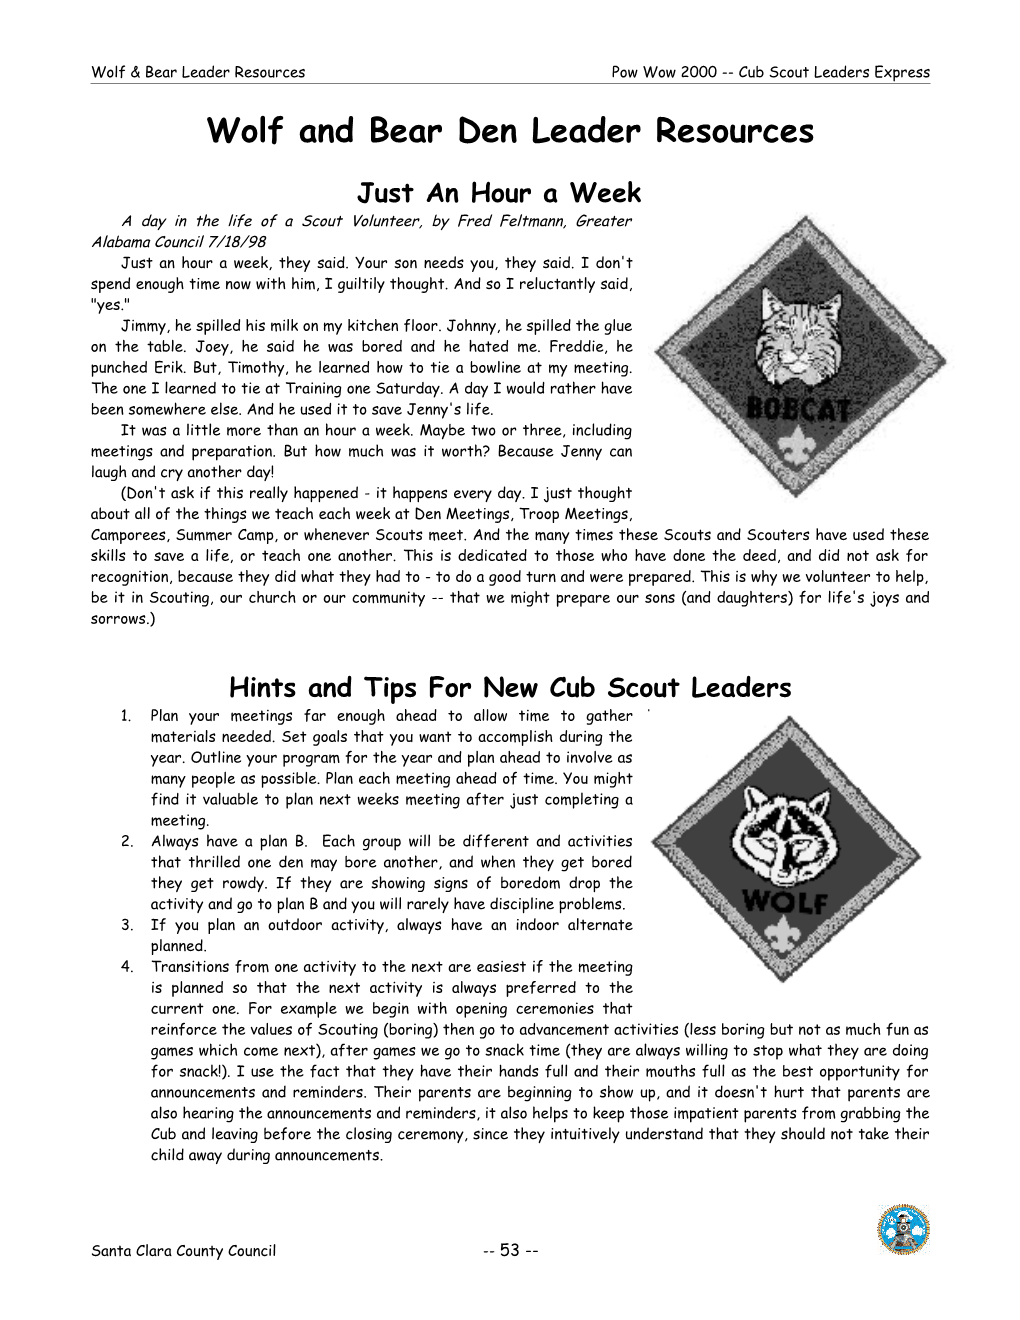 Wolf and Bear Den Leader Resources